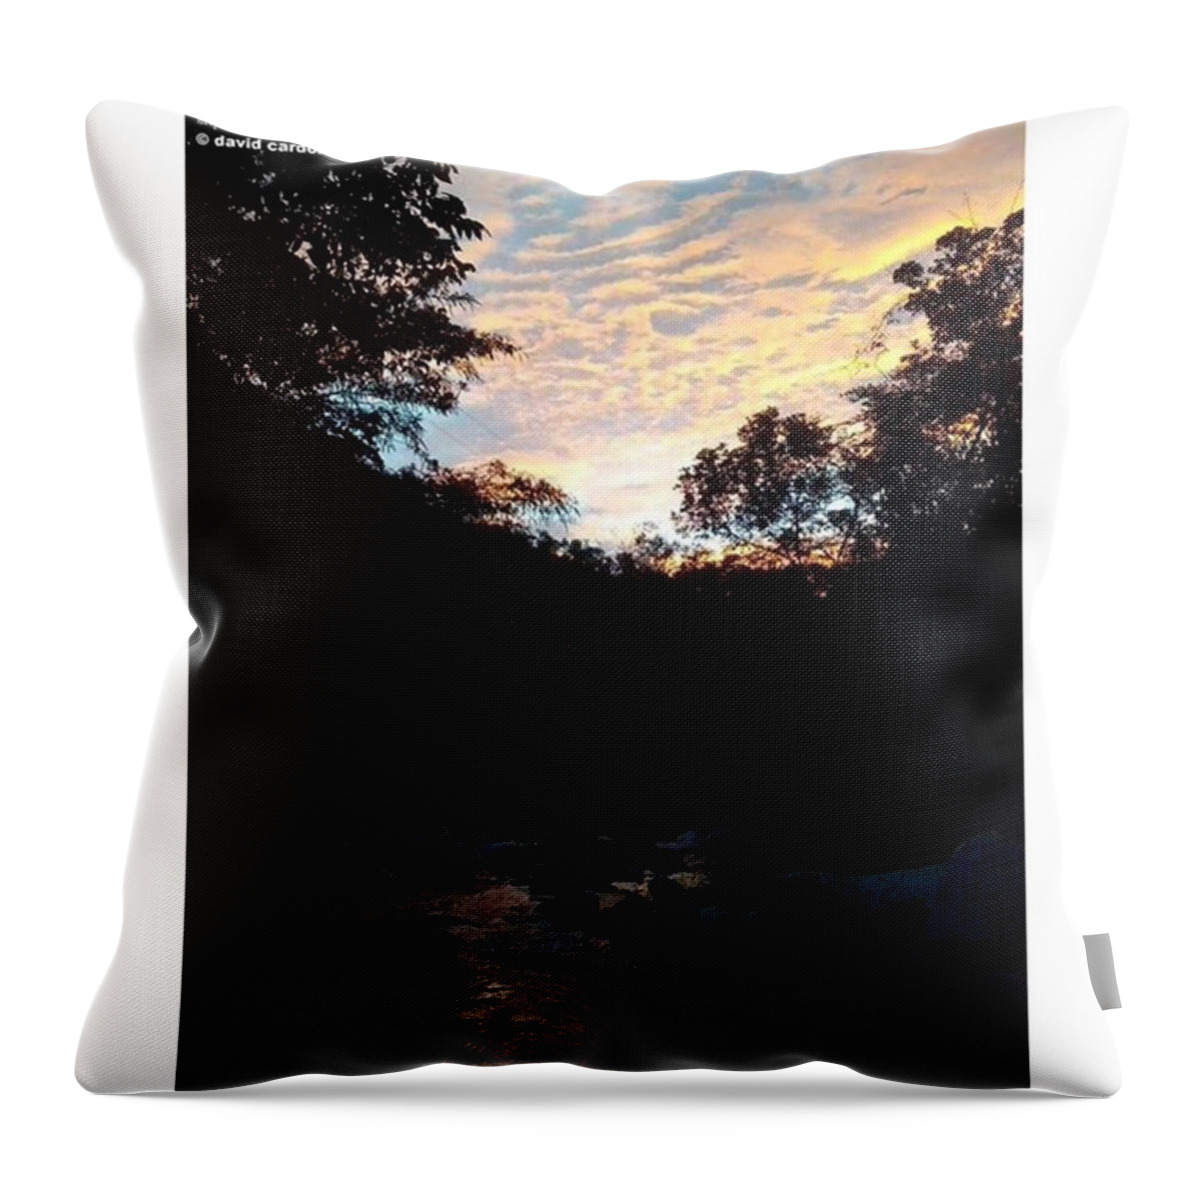 Mountains Throw Pillow featuring the photograph Fire In The Sky by David Cardona